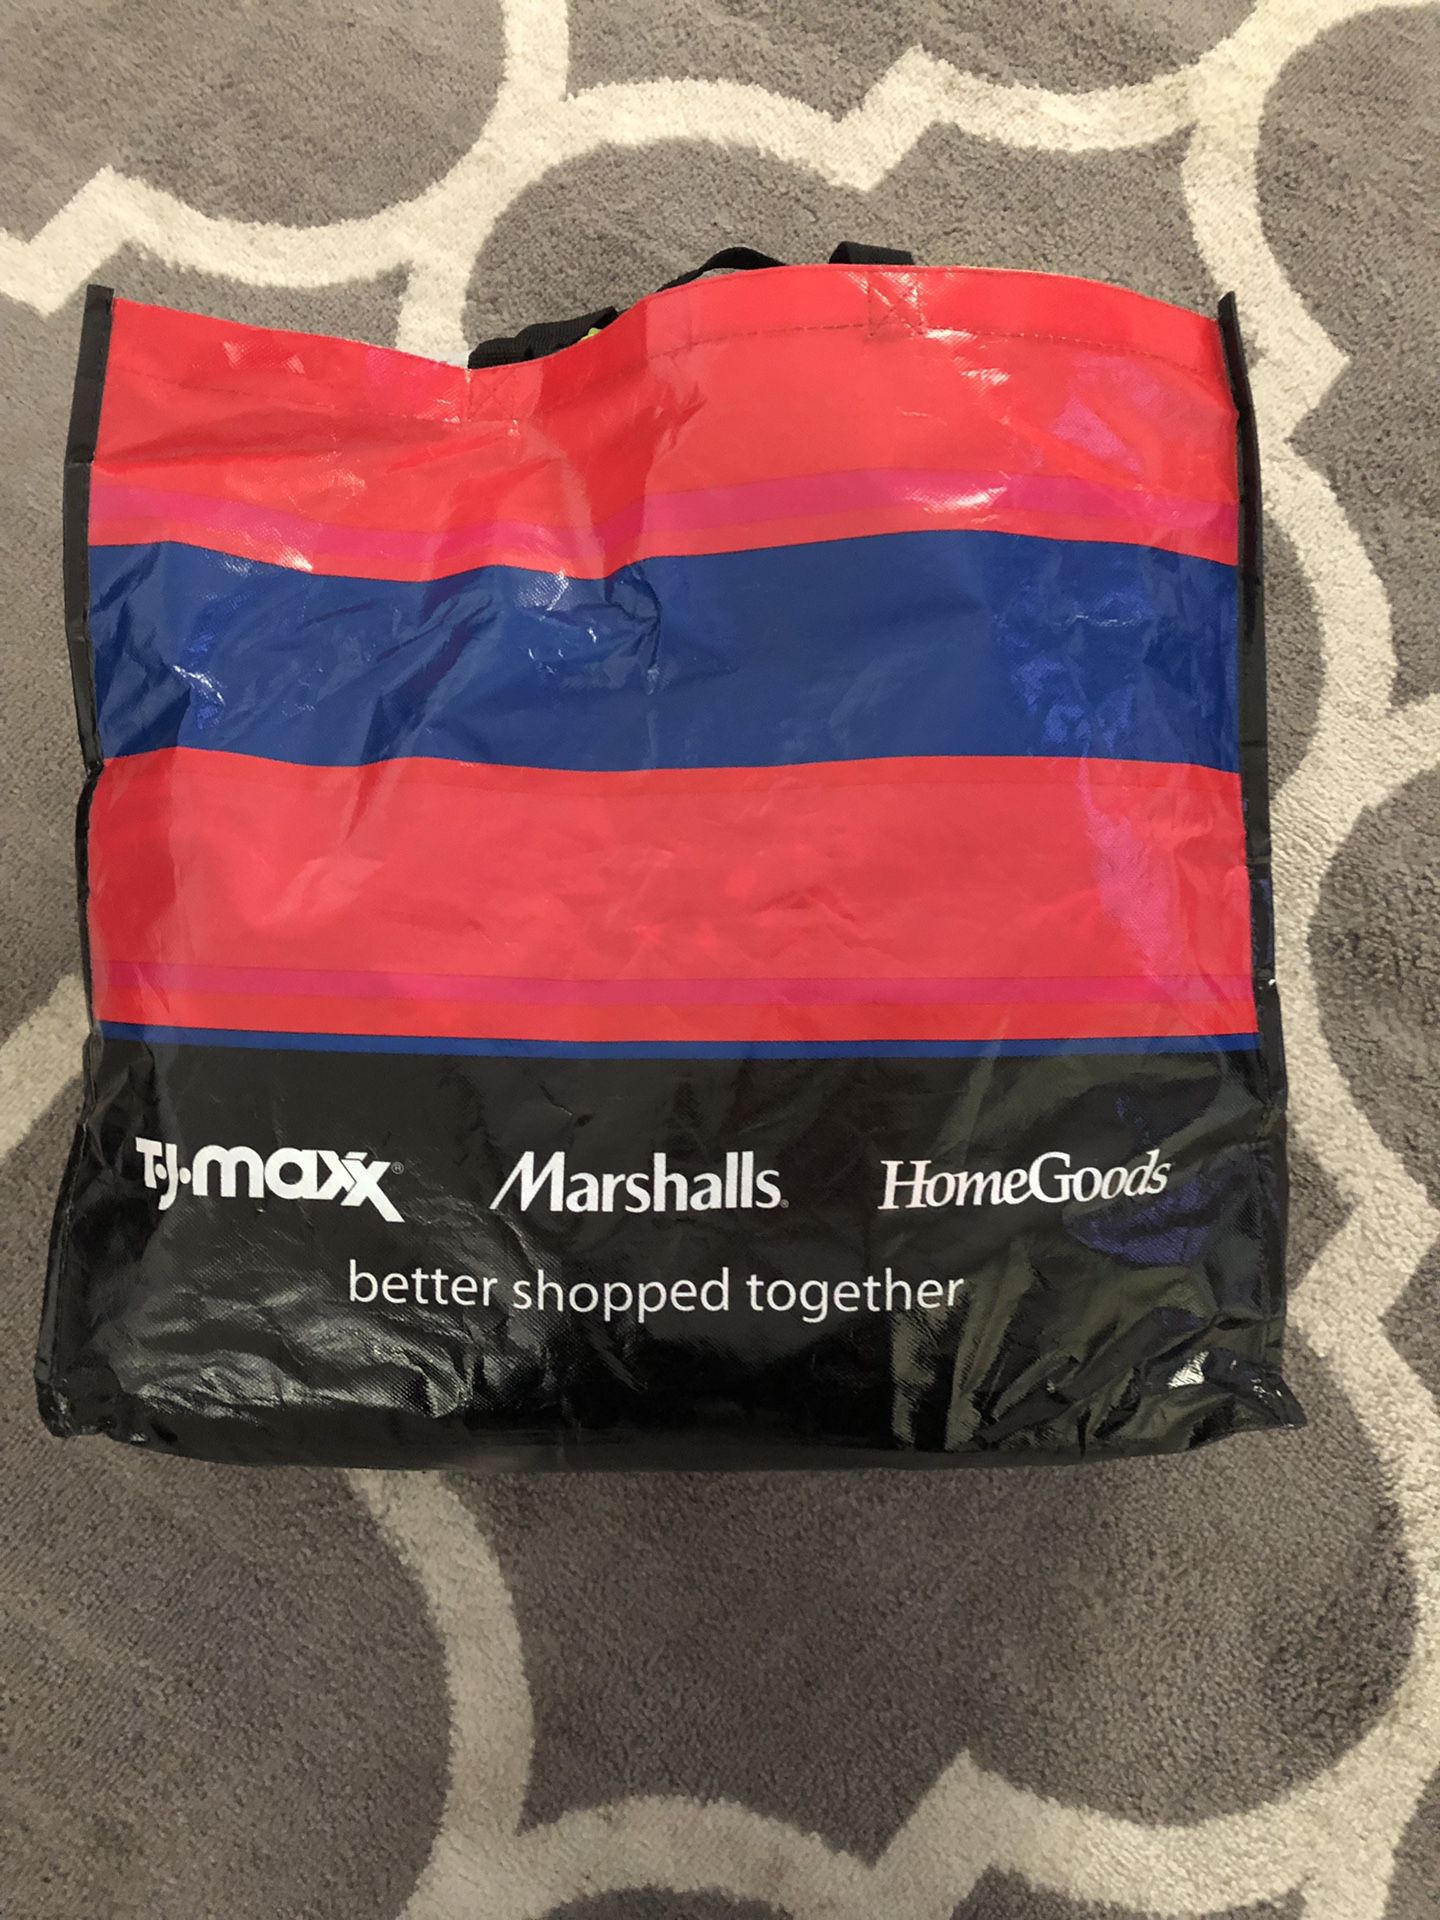 Mystery Bag of Baby/kid clothes